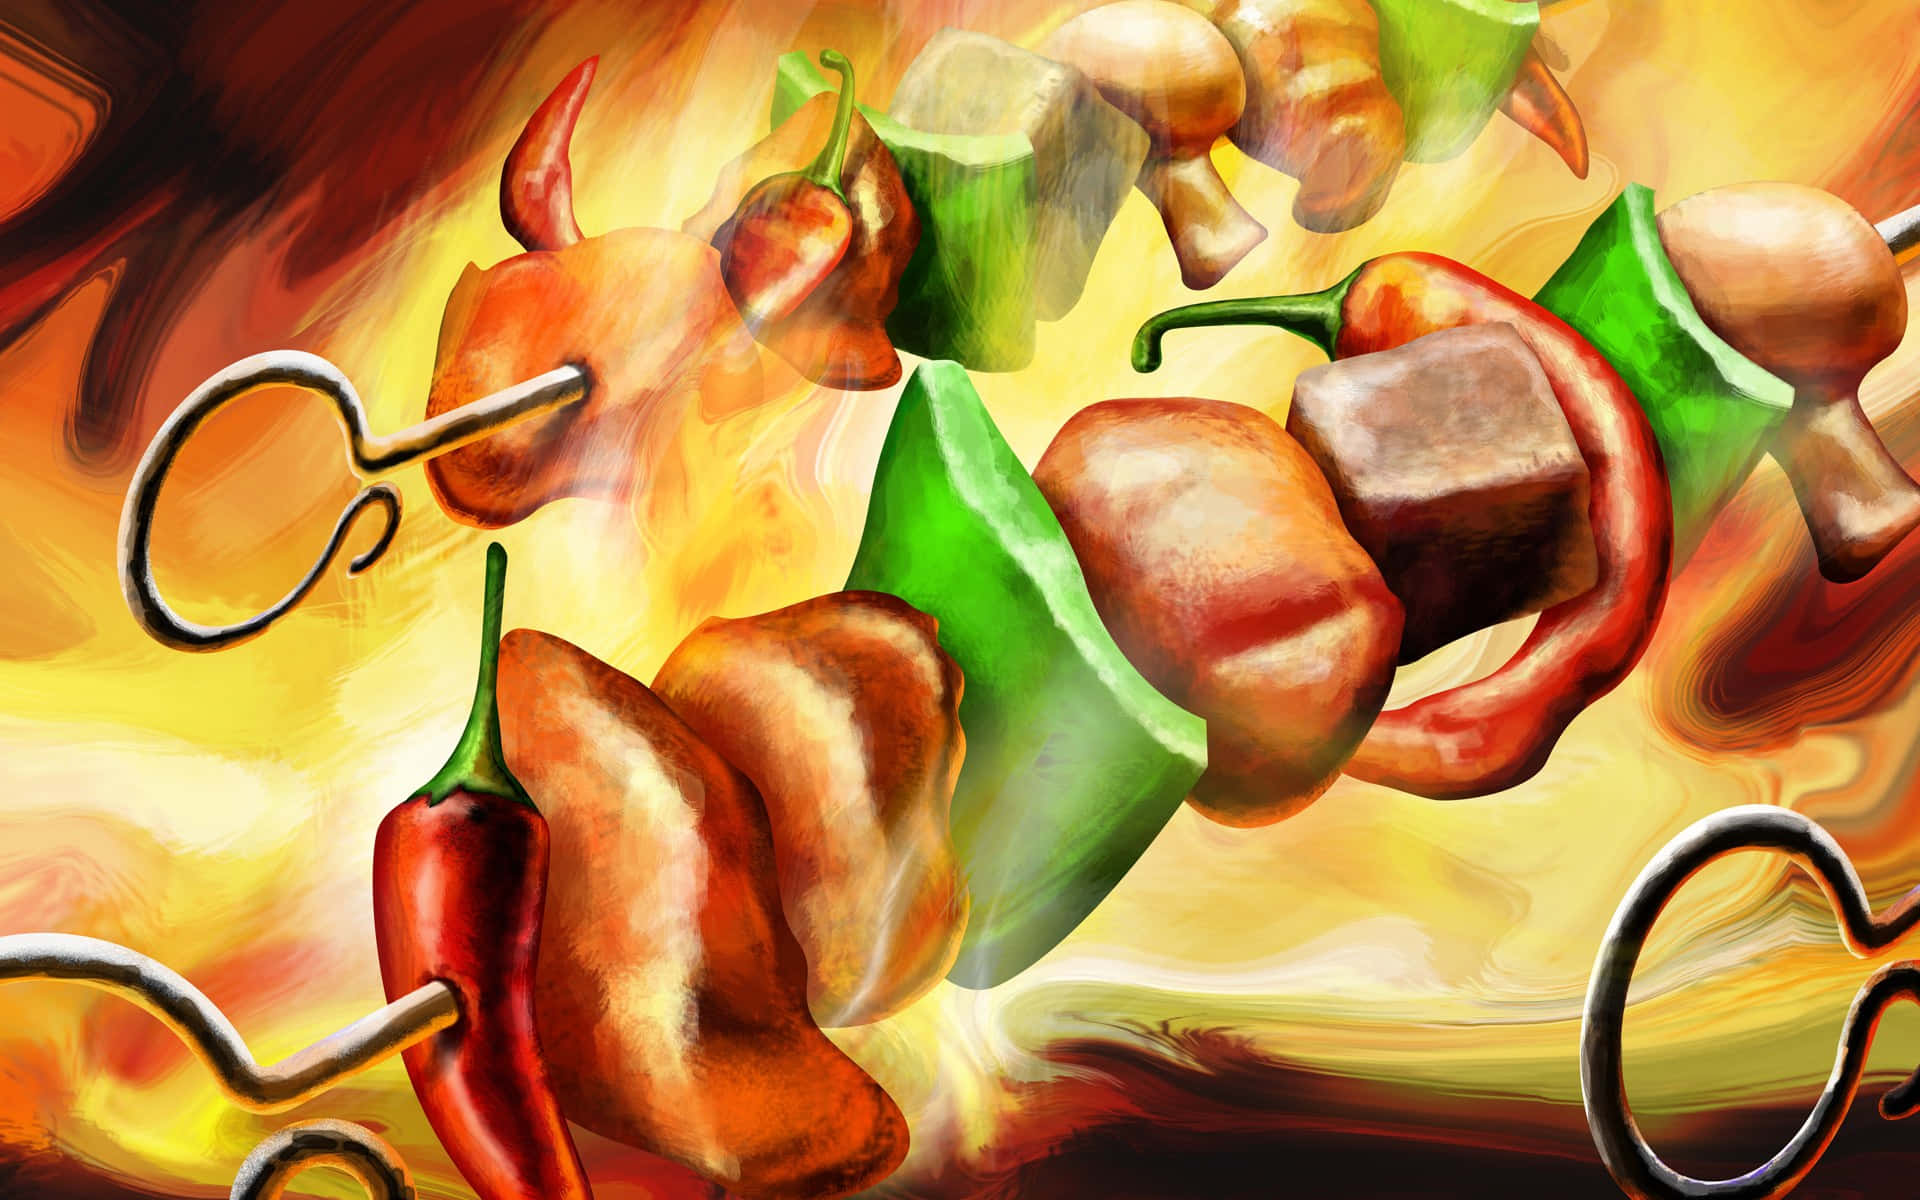 A Painting Of Skewers On Fire